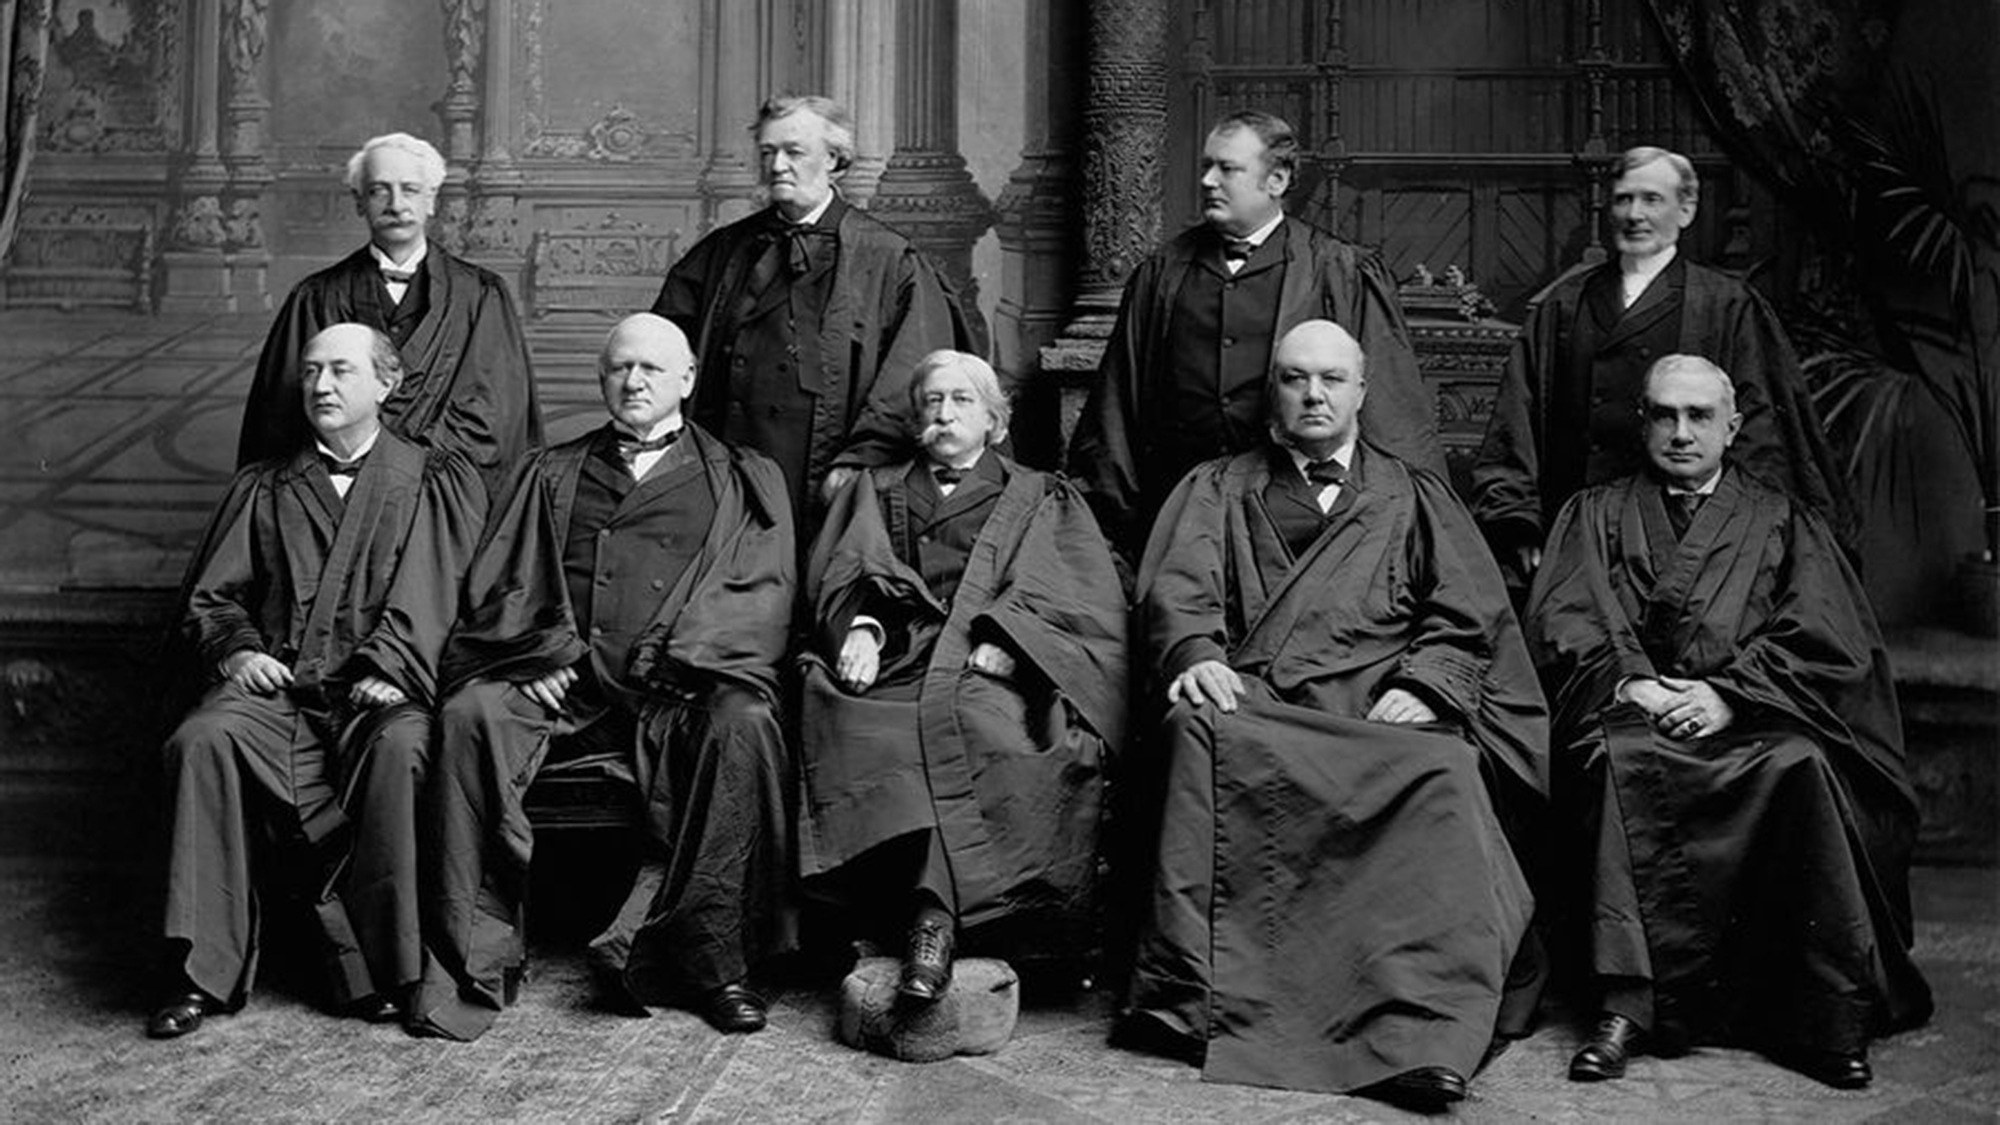 The Supreme Court and the pursuit of racial equality